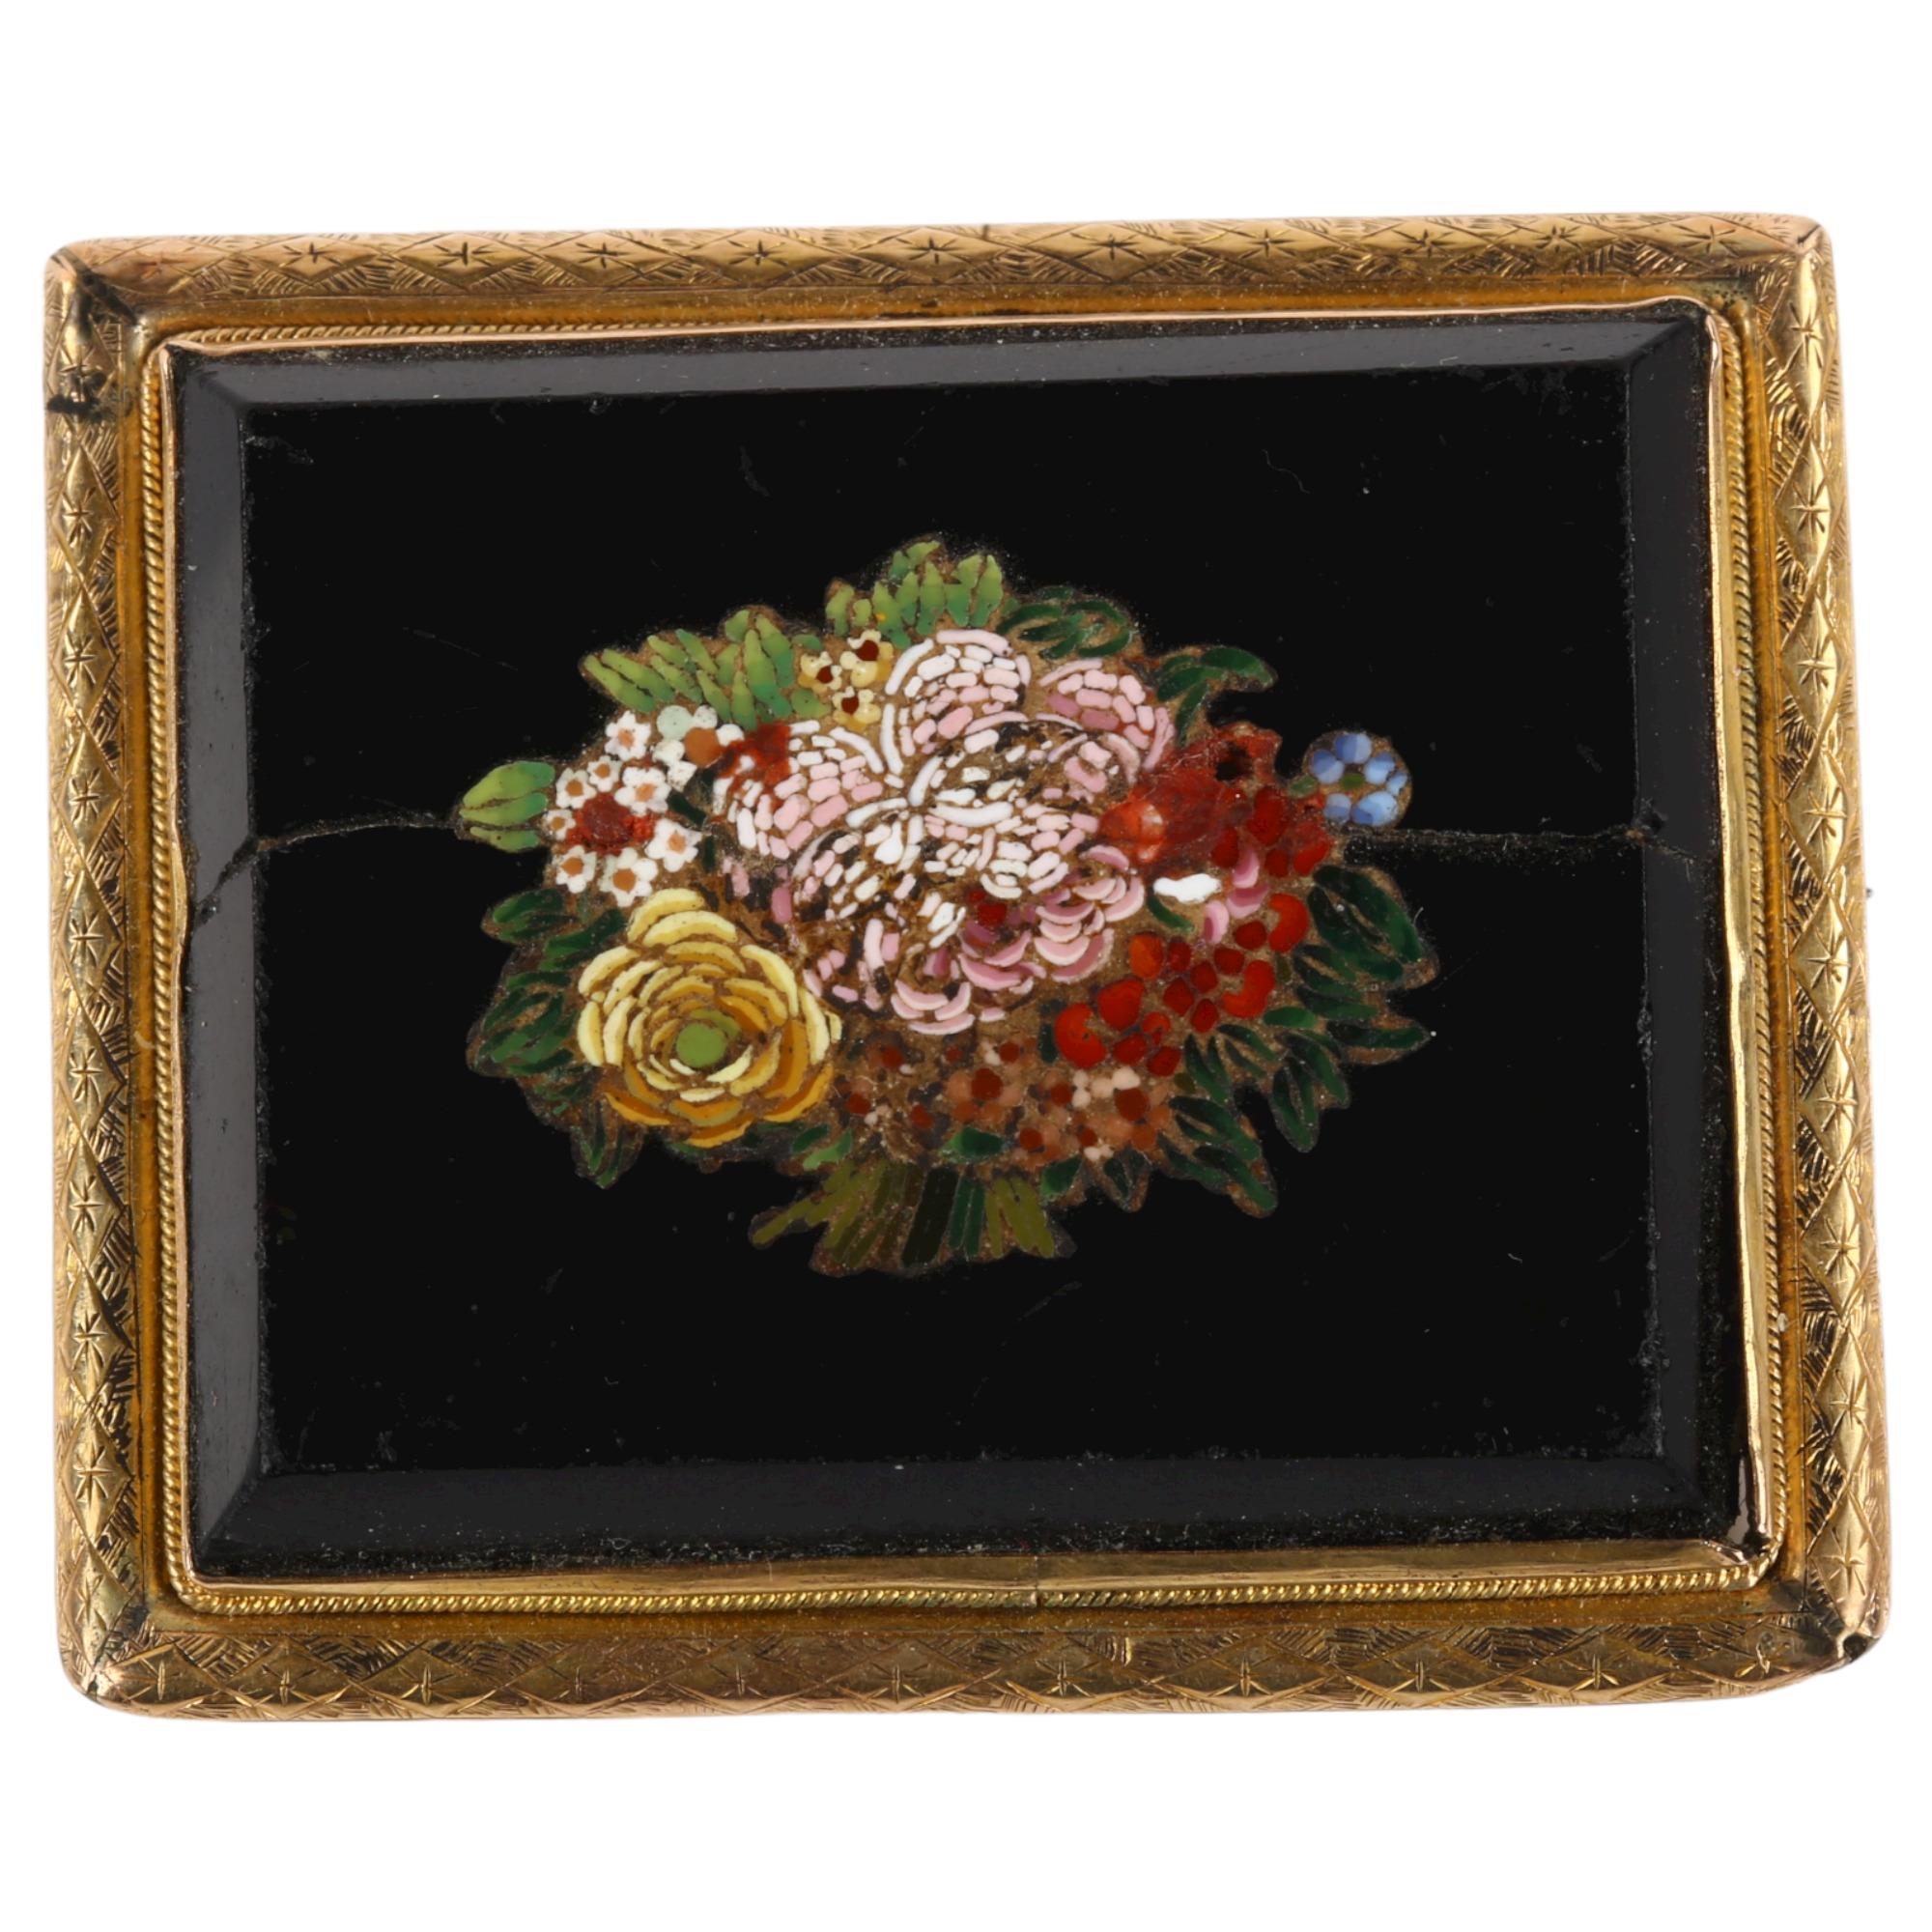 An Antique Italian micro-mosaic plaque brooch, depicting bunch of flowers, in unmarked yellow